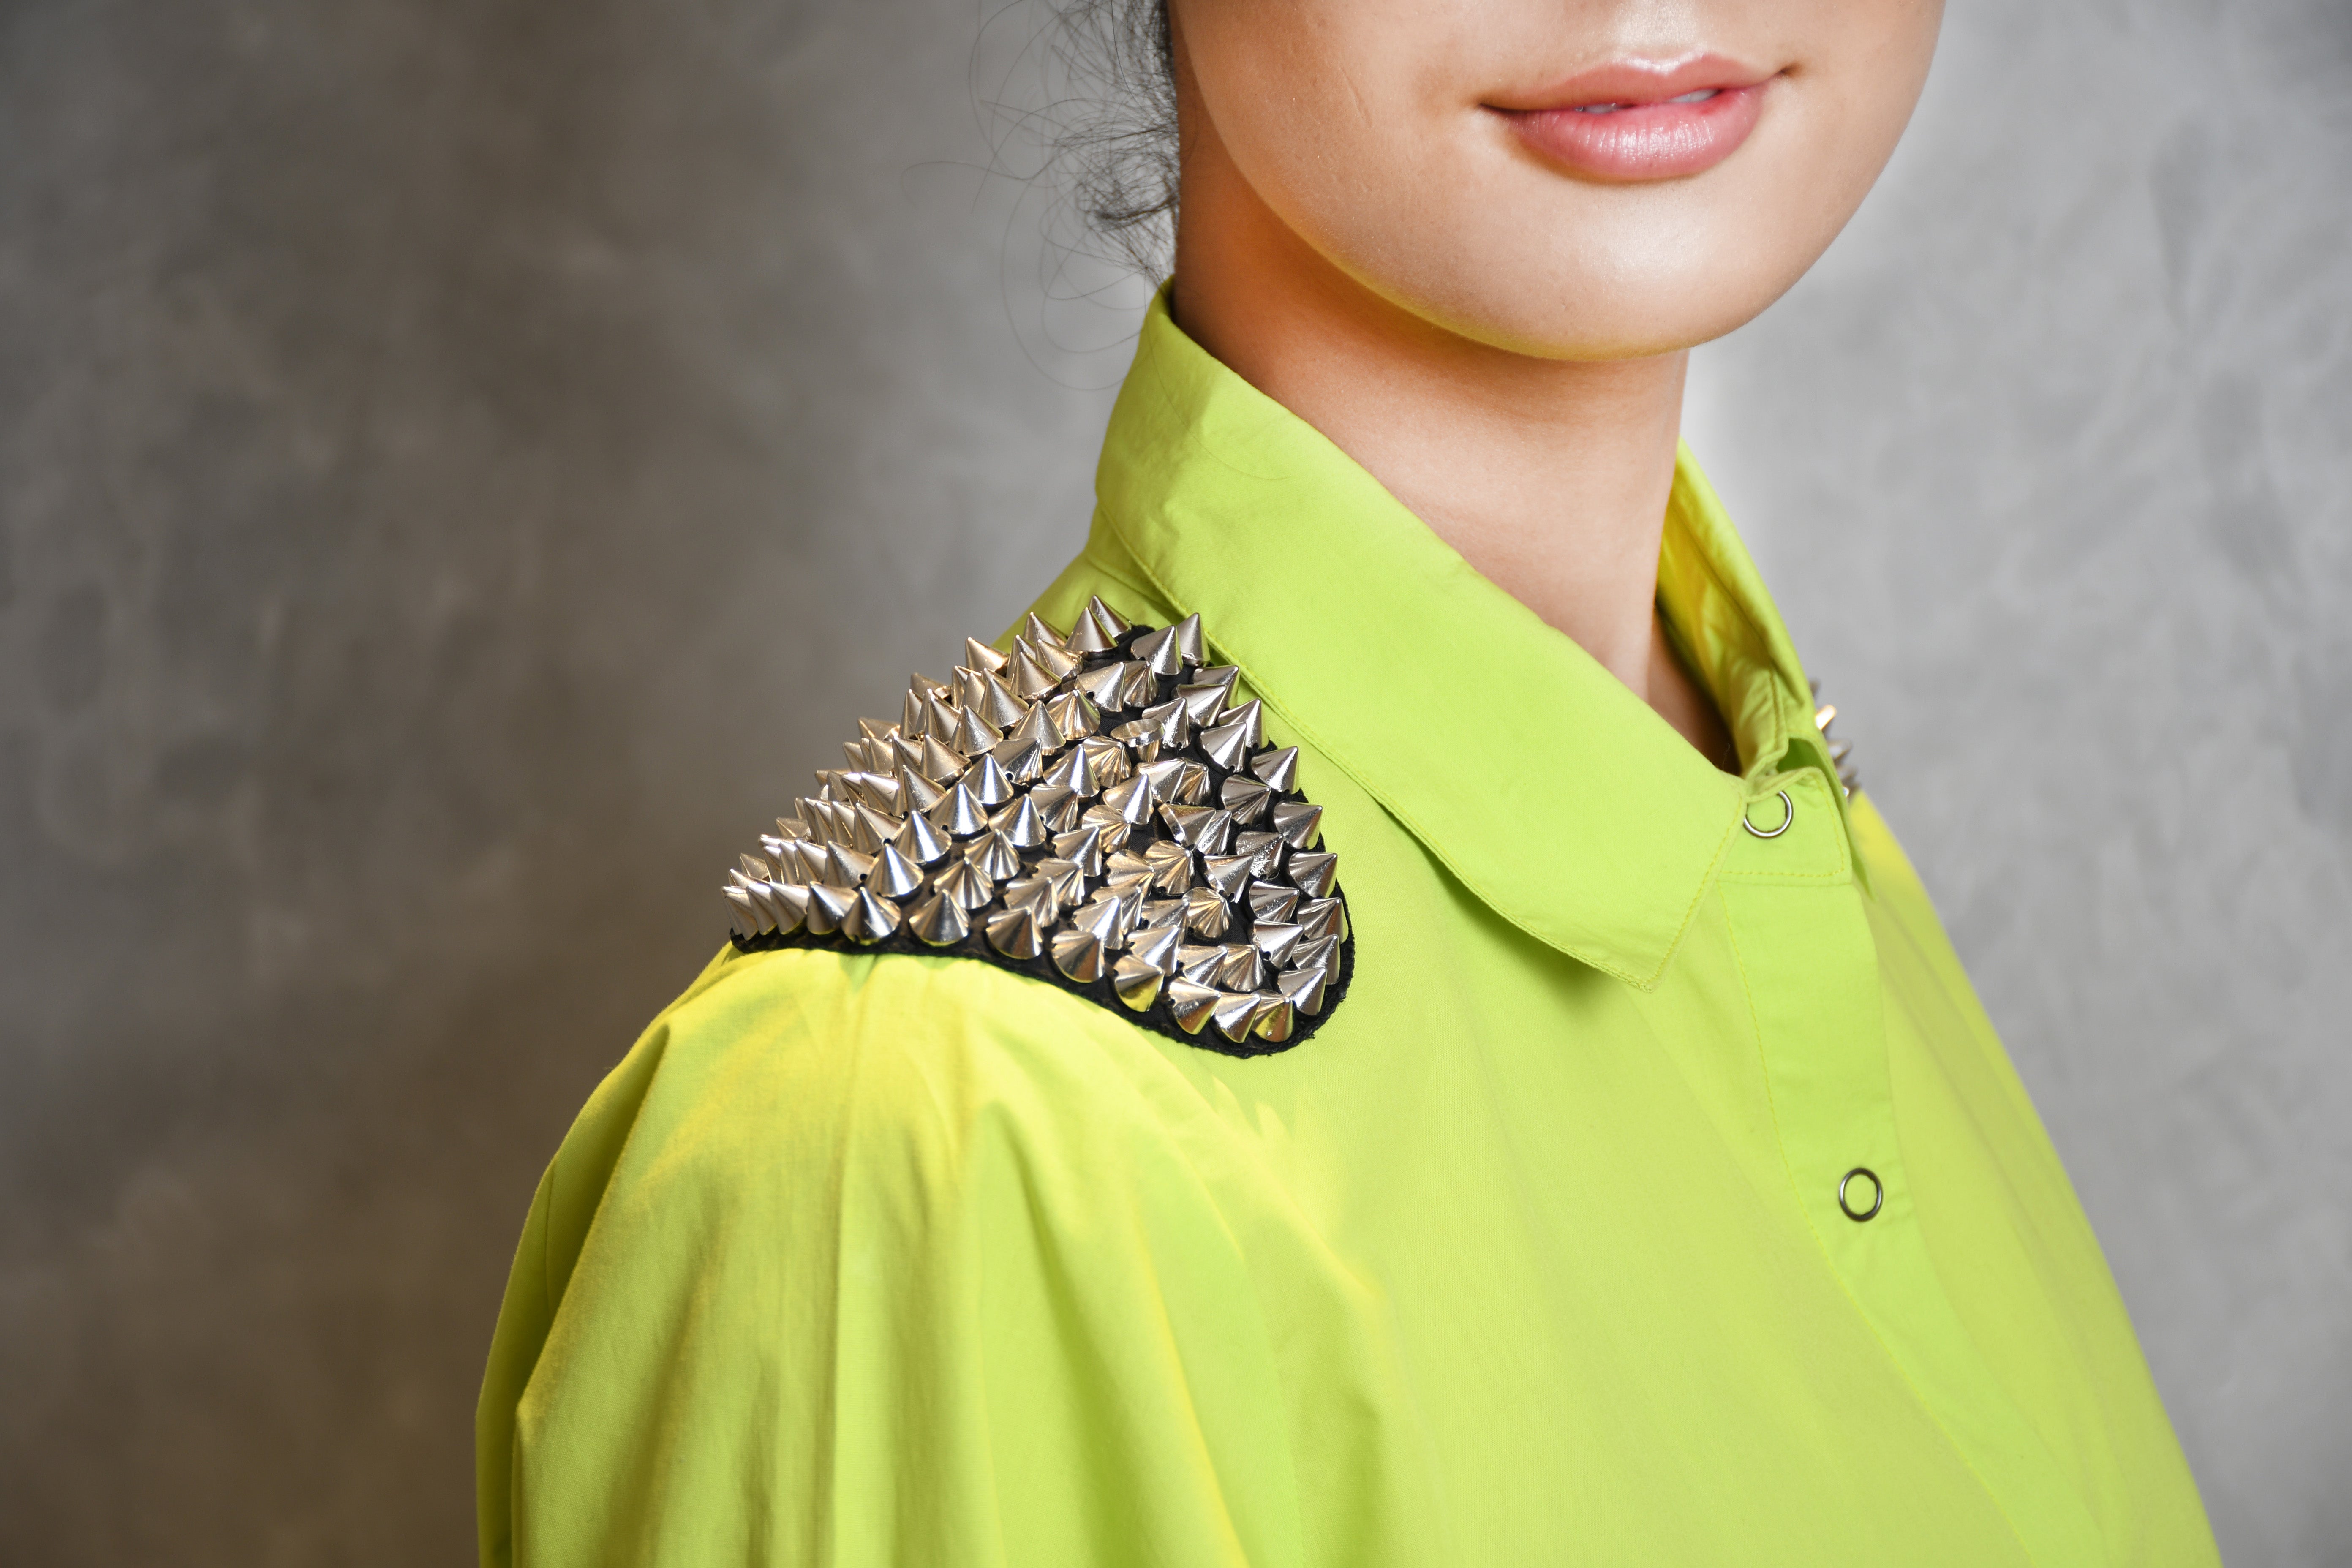 NEON GREEN SHIRT WITH SILVER SPIKE SHOULDER PATCH,TAPE DETAILINGS AND STRAIGHT PANTS